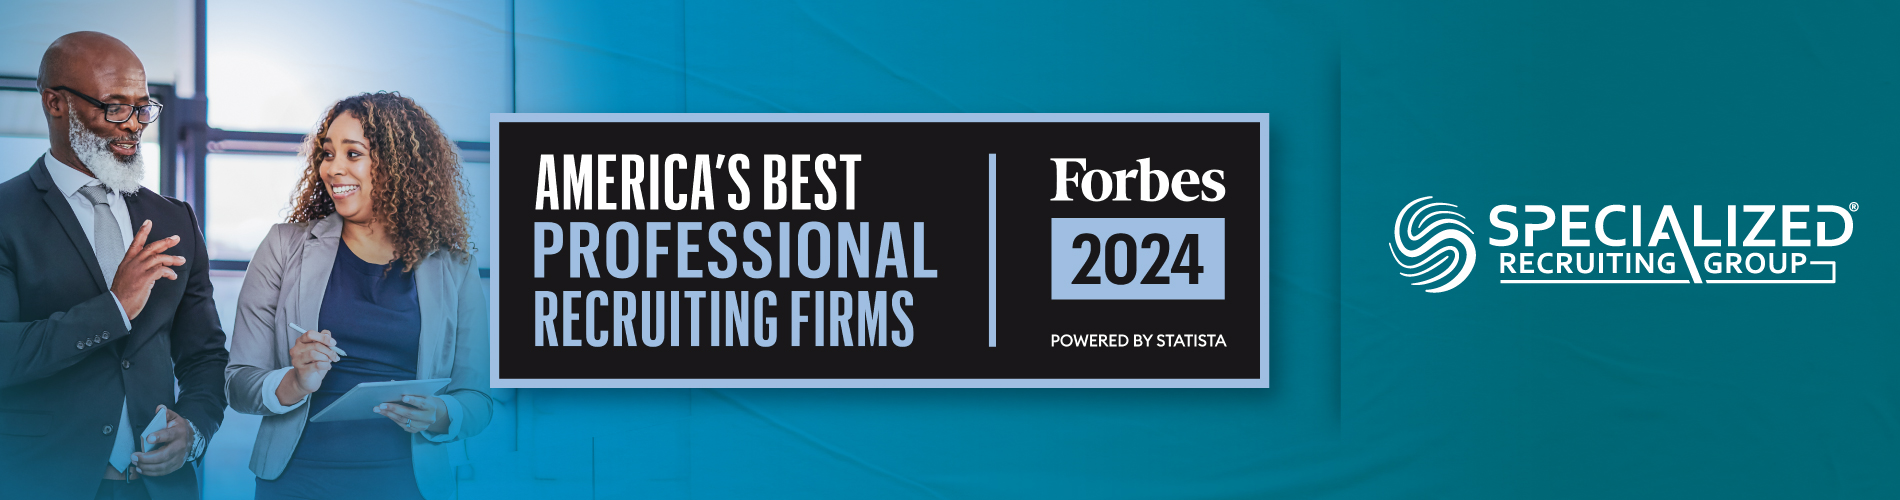 Forbes-Best-Pro-SRG-2024